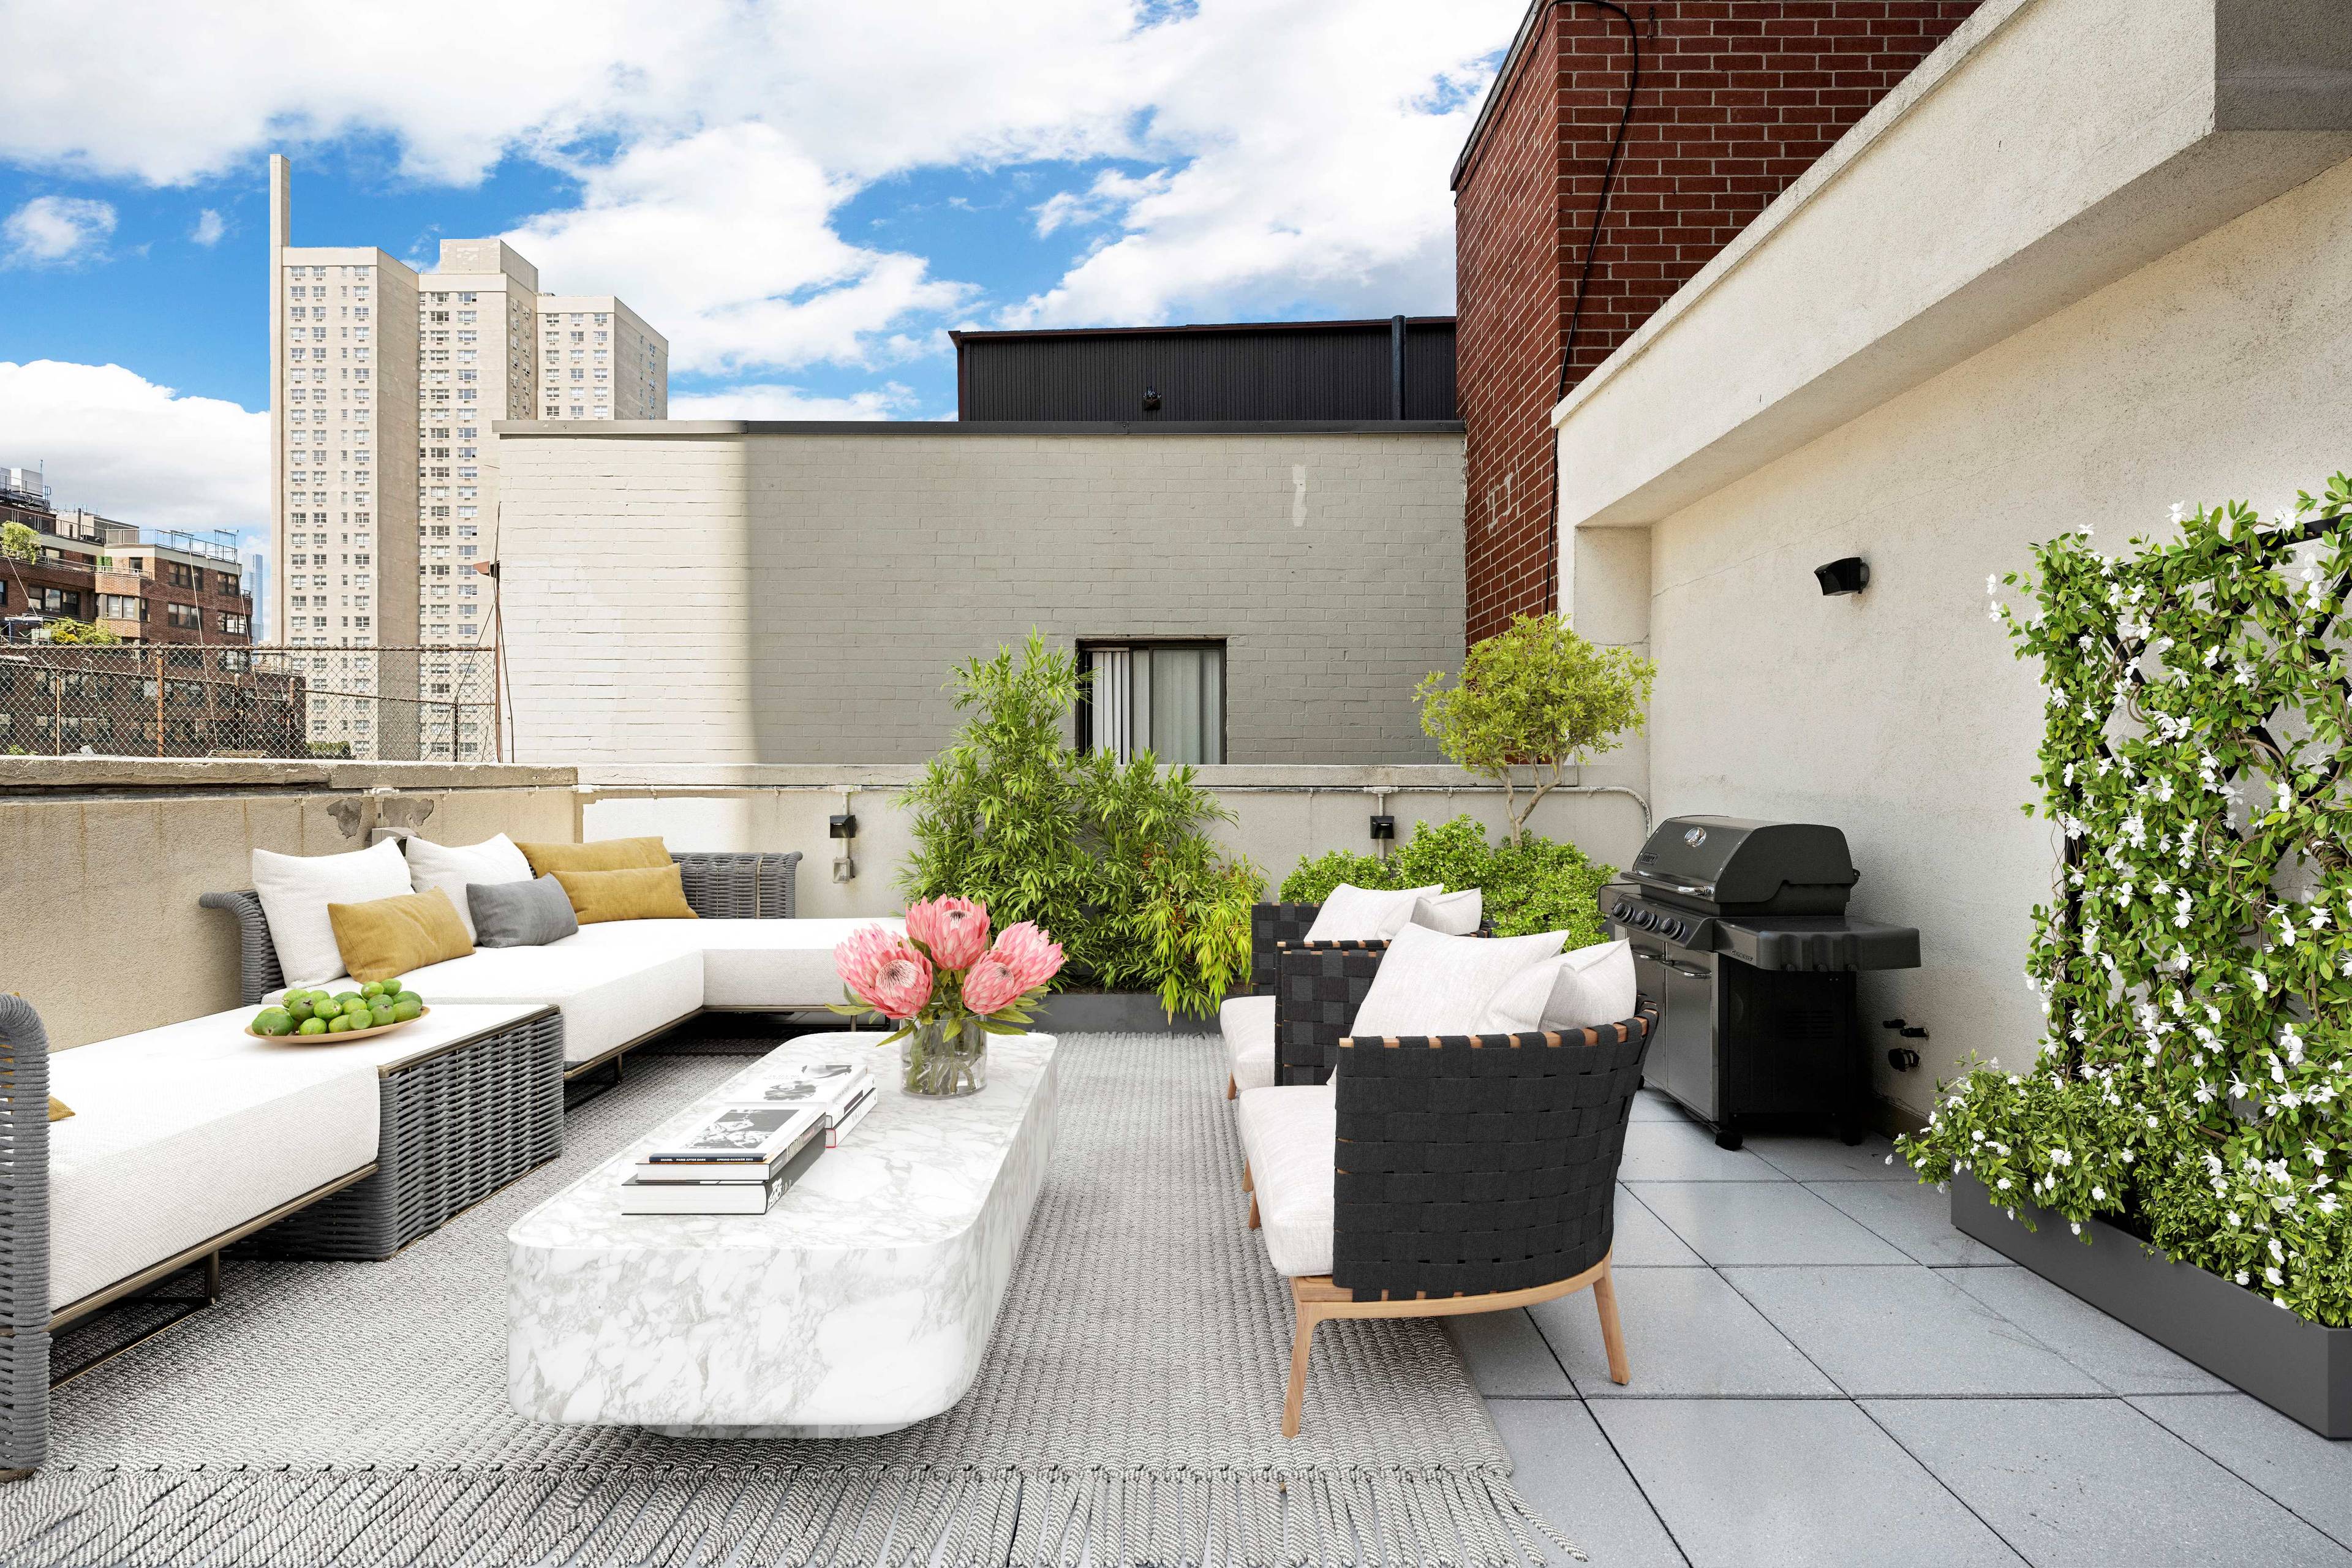 The Penthouse at 554 East 82nd Street